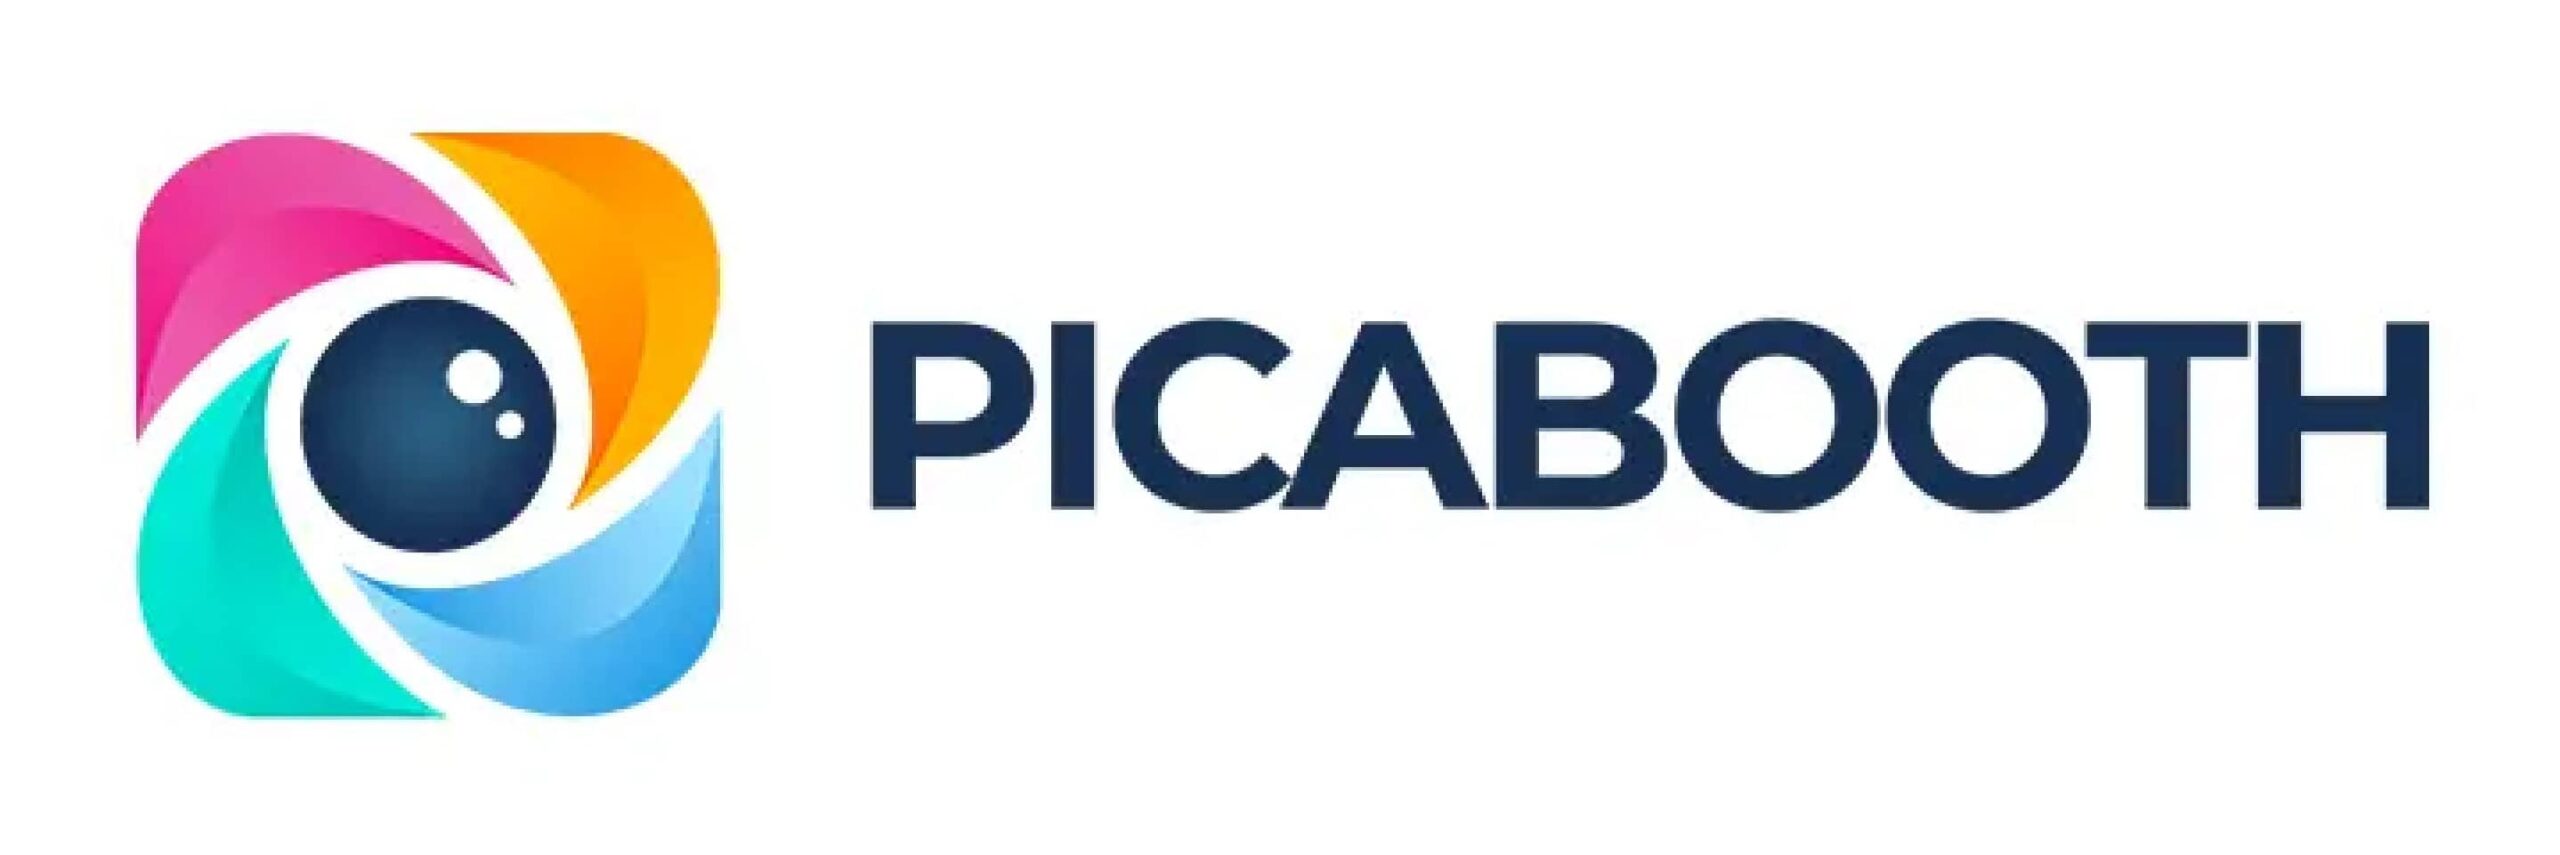 Picabooth web logo MAY23